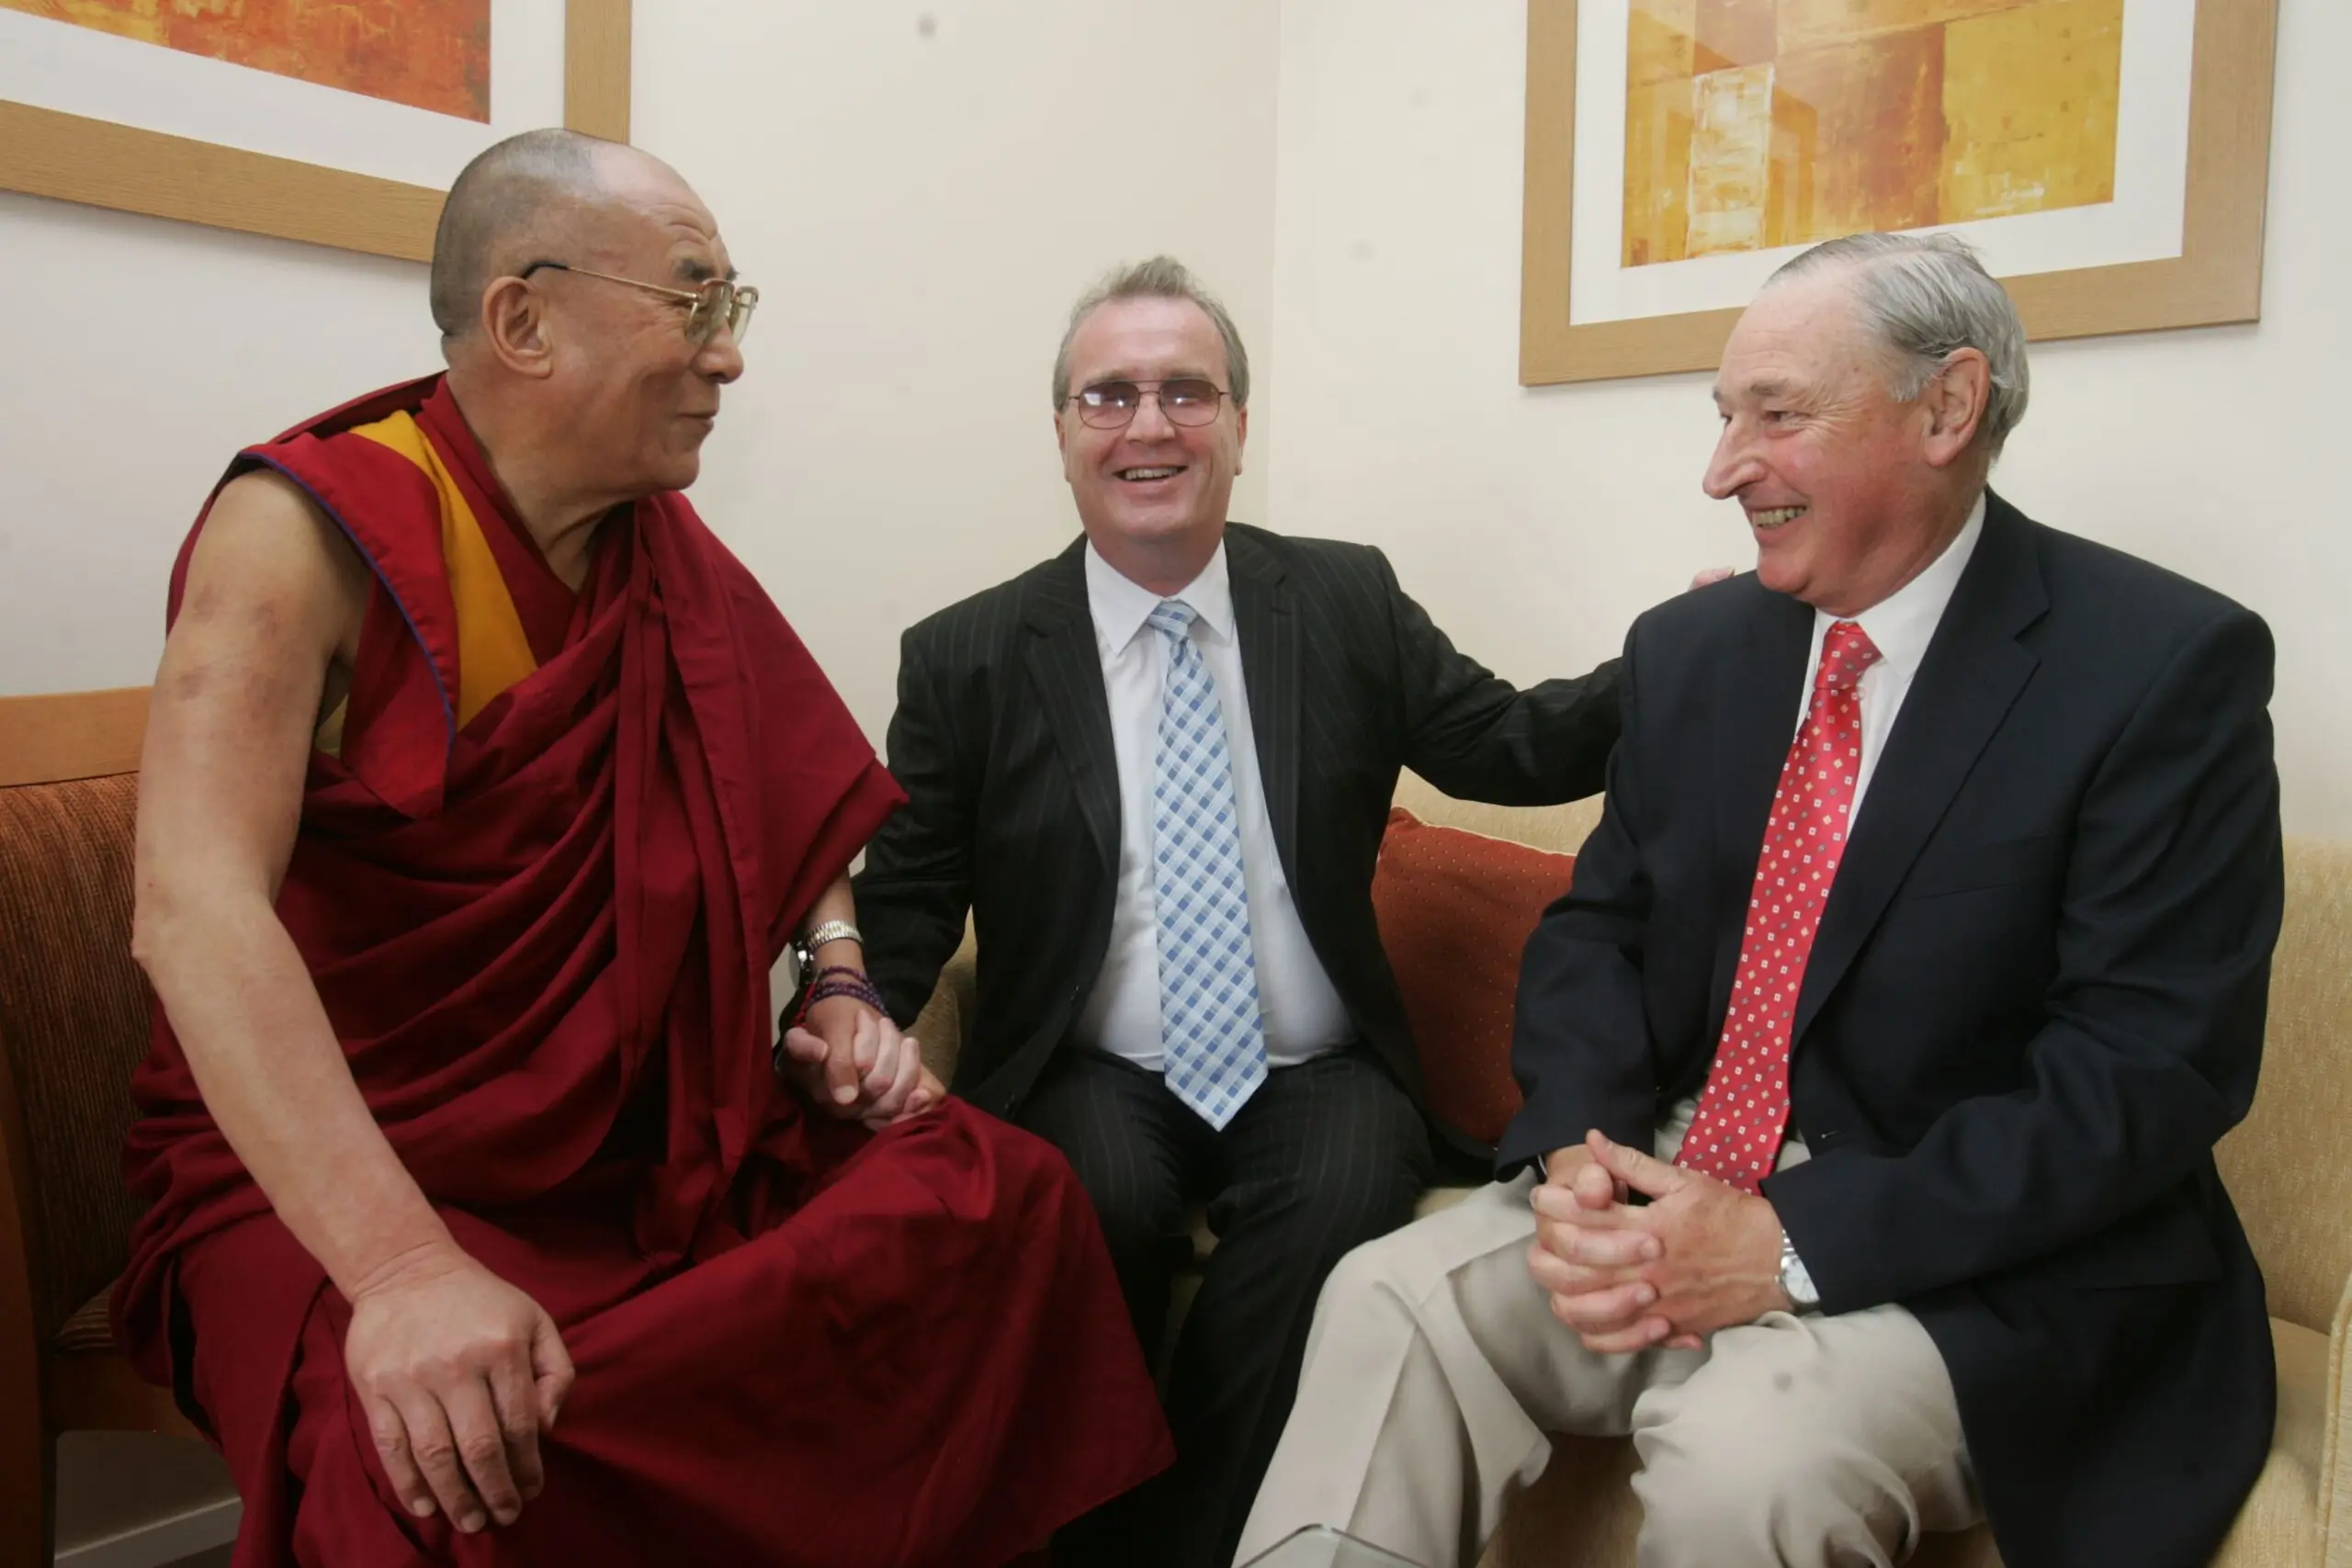 The Dali Lama, Richard Moore, and Charles Innes meeting in Derry in 2007.